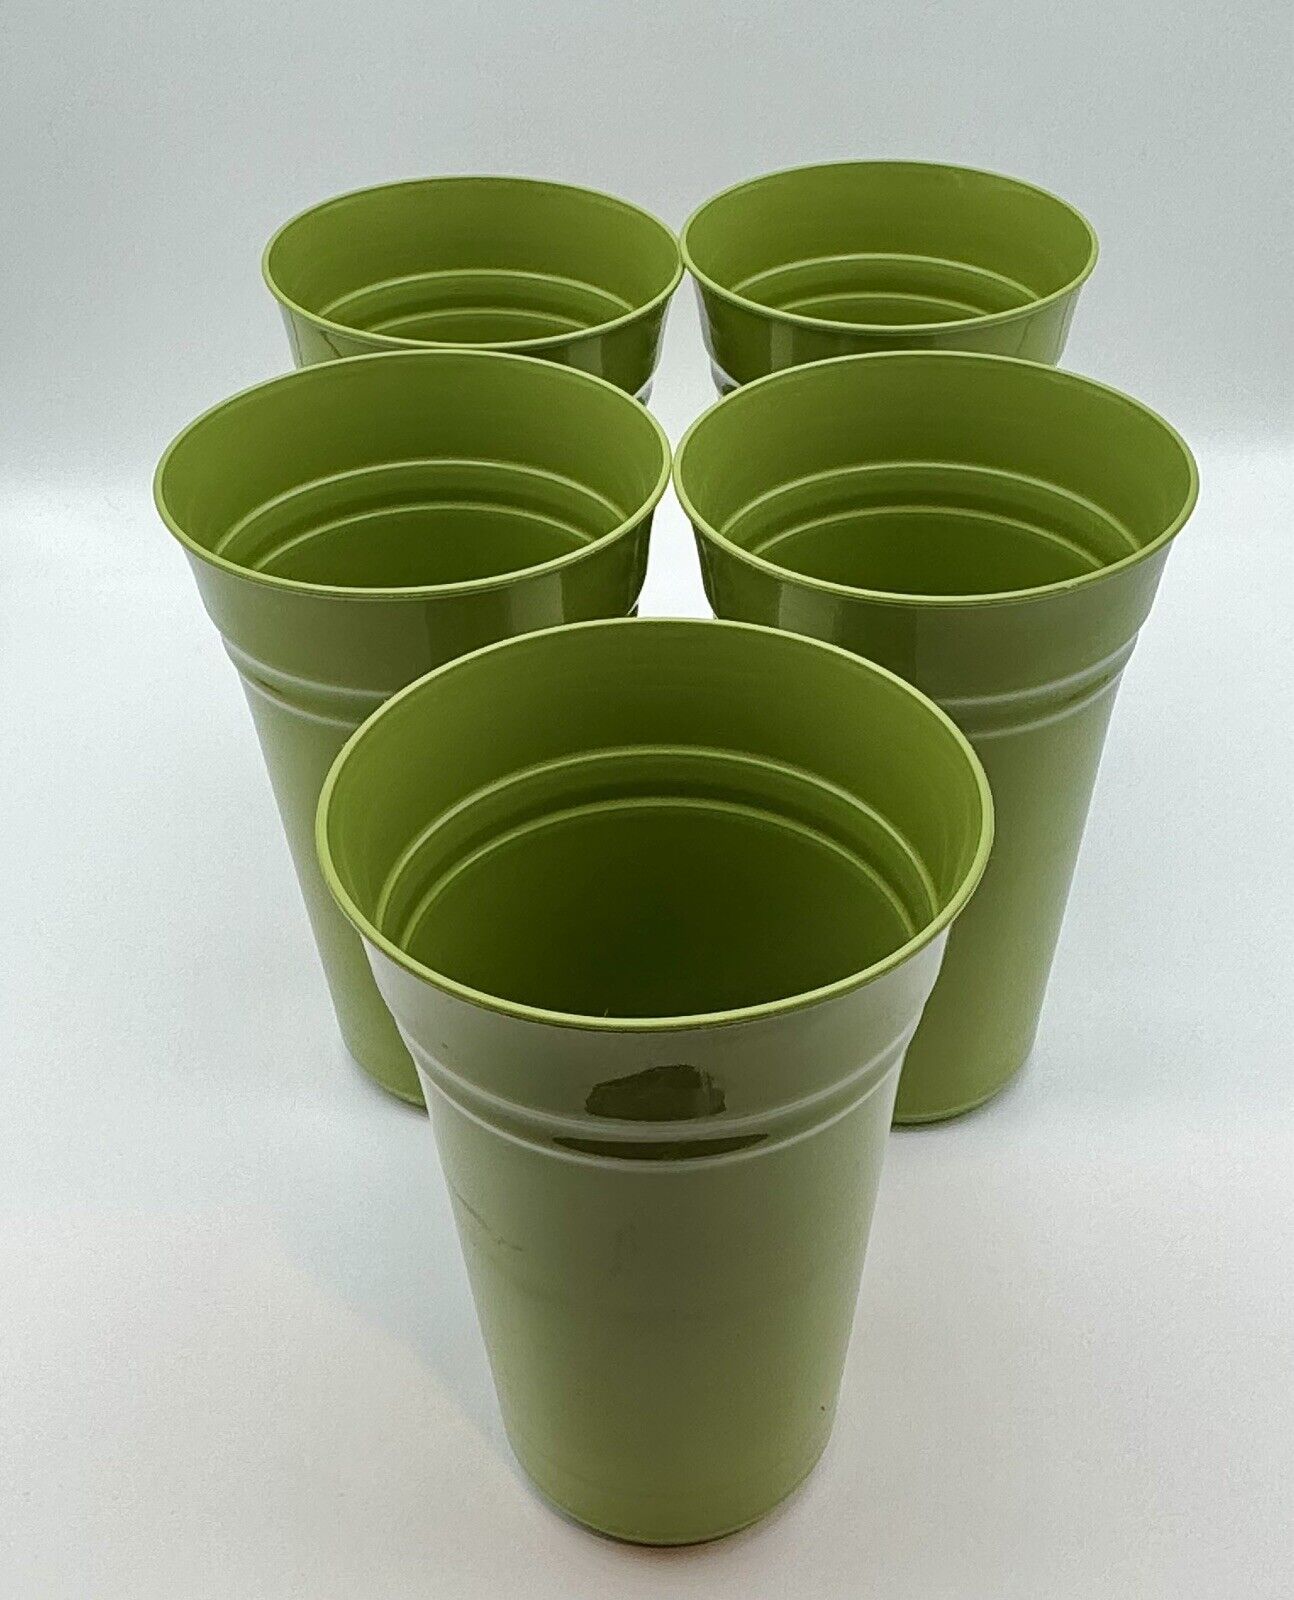 Retro PackerWare Set of 5 Olive Green 20oz Plastic Tumblers Made in USA